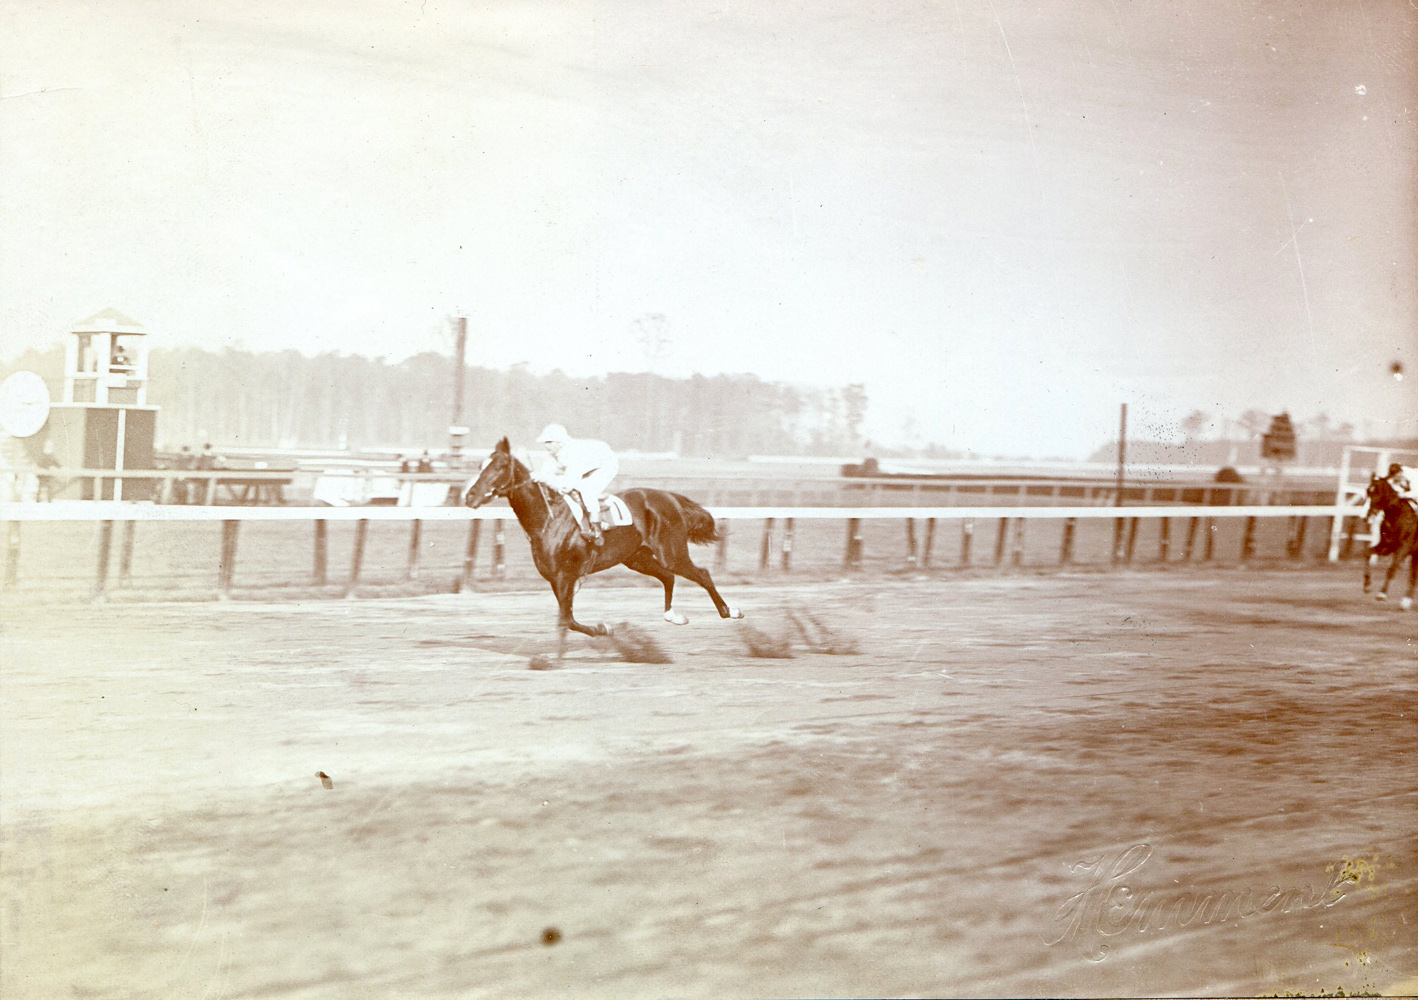 Walter Miller and Colin winning the 1907 National Stallion Stakes at Belmont Park (J. C. Hemment/Museum Collection)